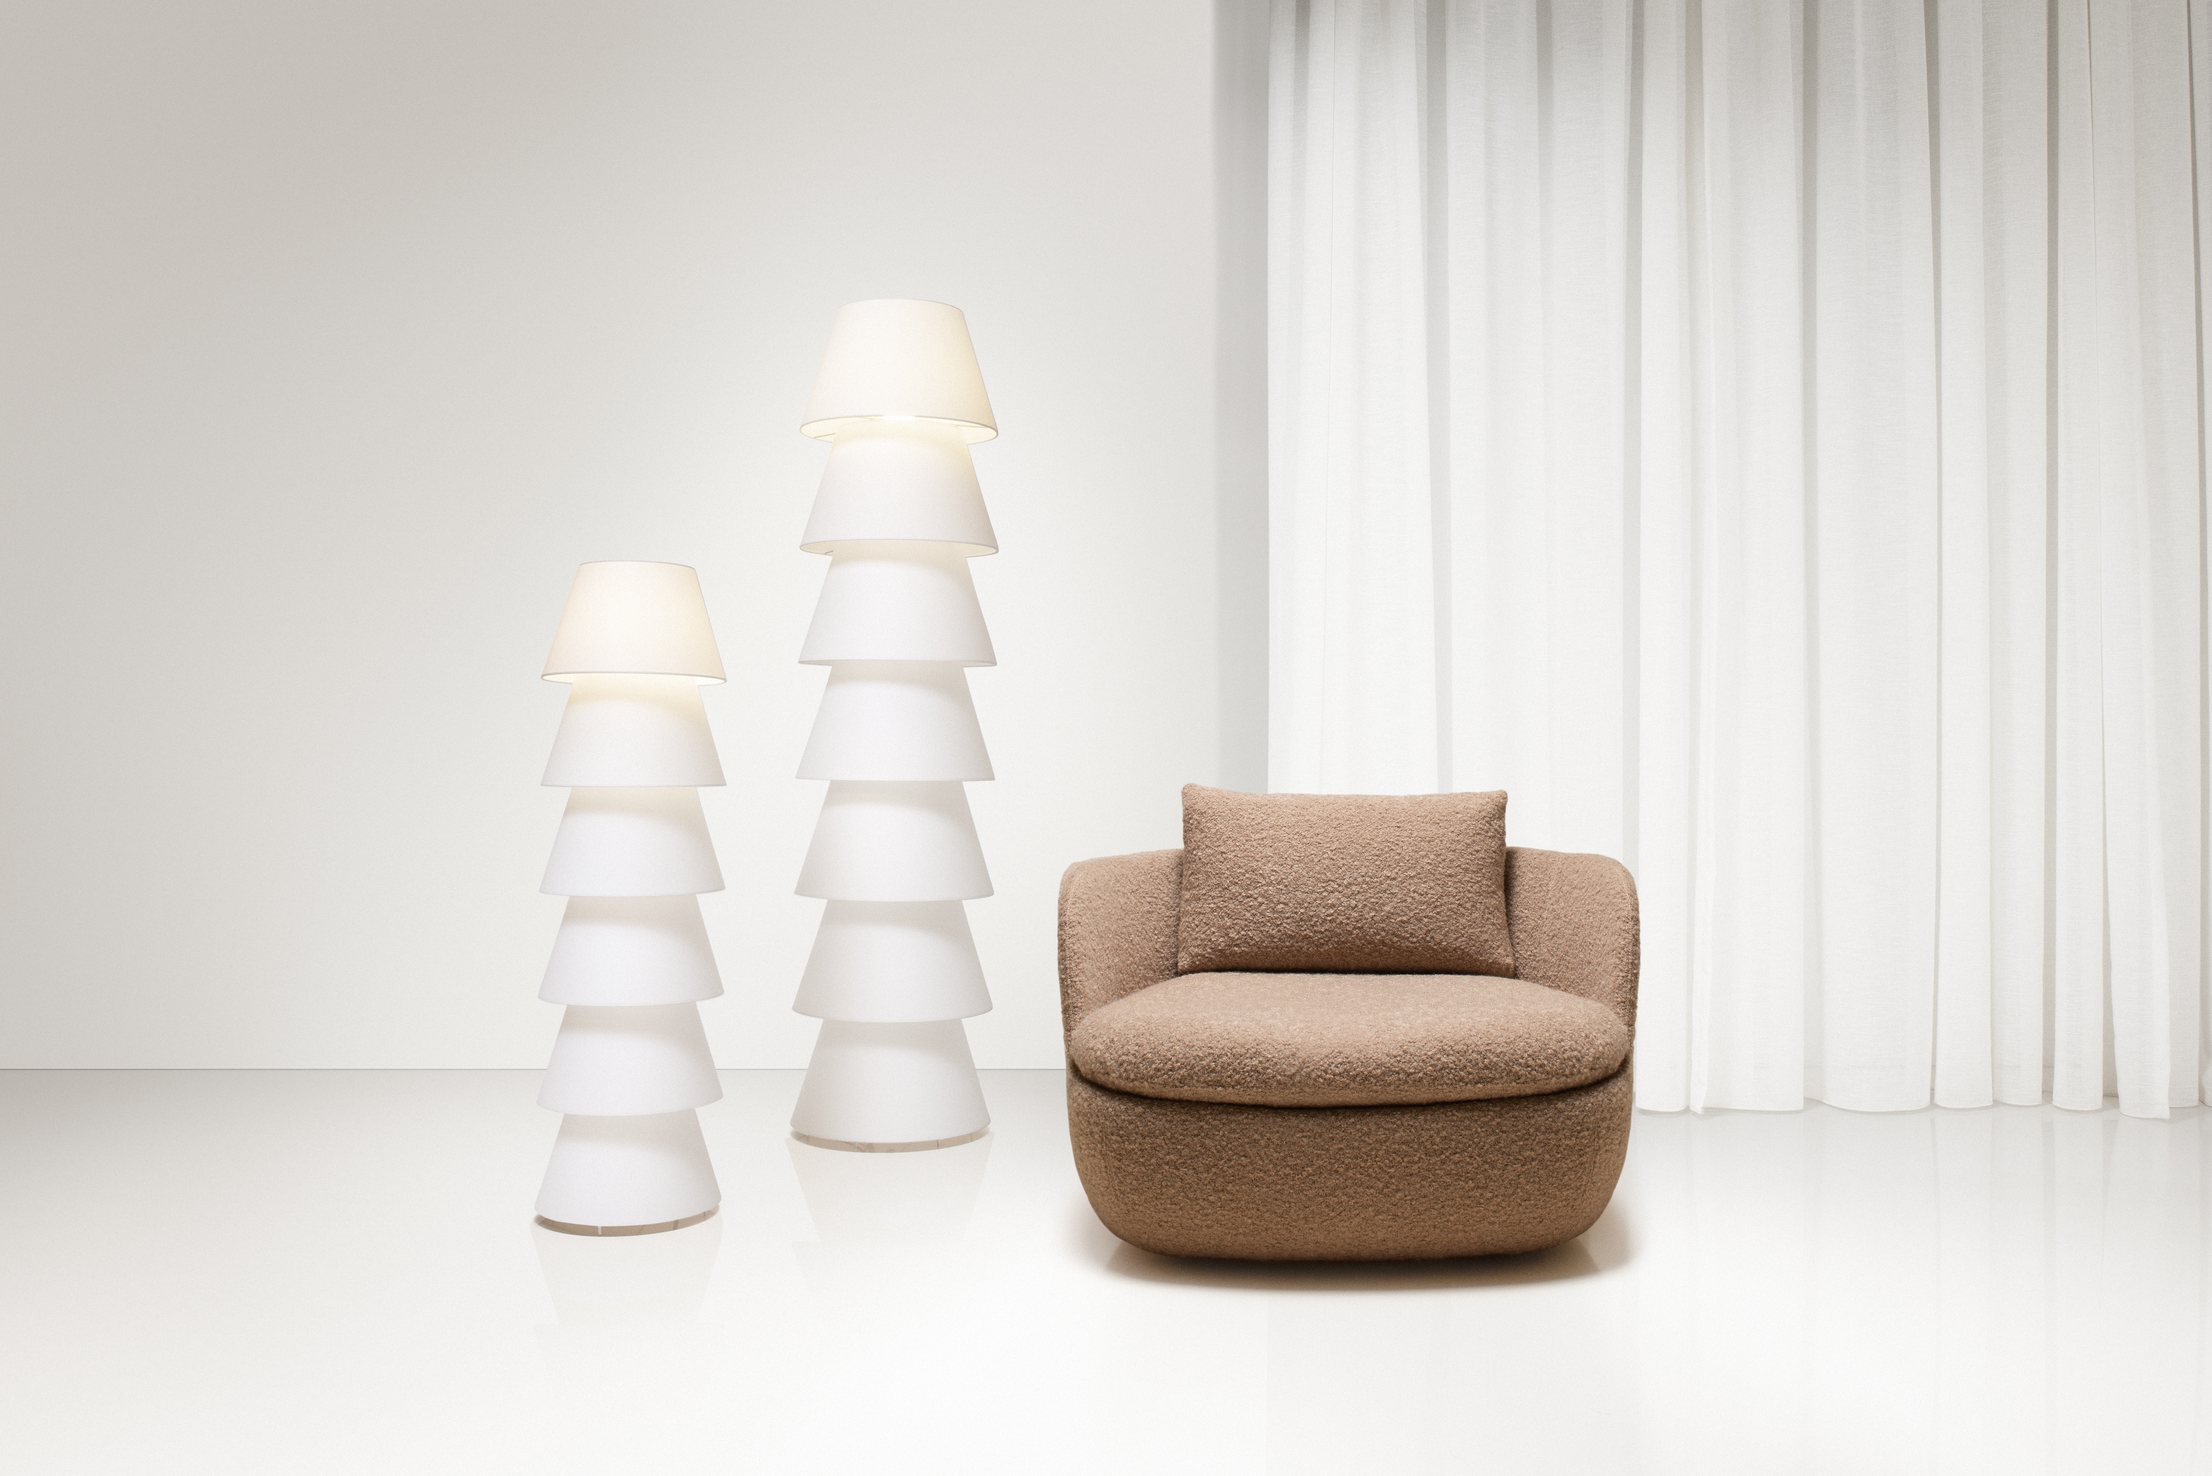 Poetic composition Bart Armchair and Set Up Shades floor lamp